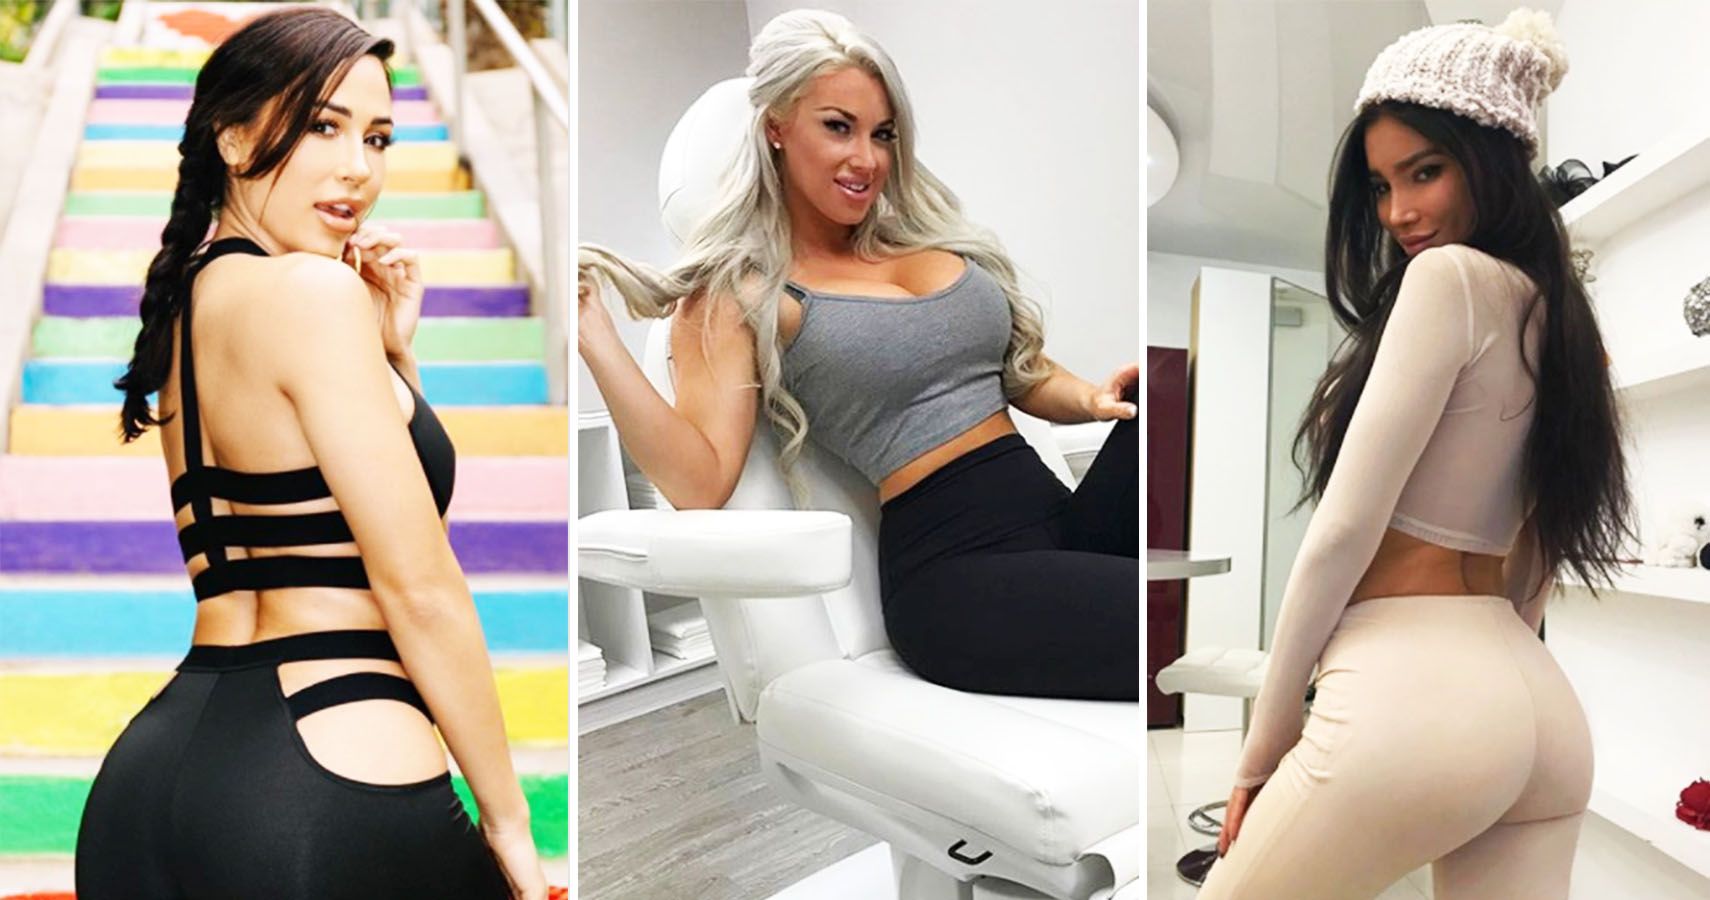 Female Fitness Model Instagram Accounts That Drive Us Crazy